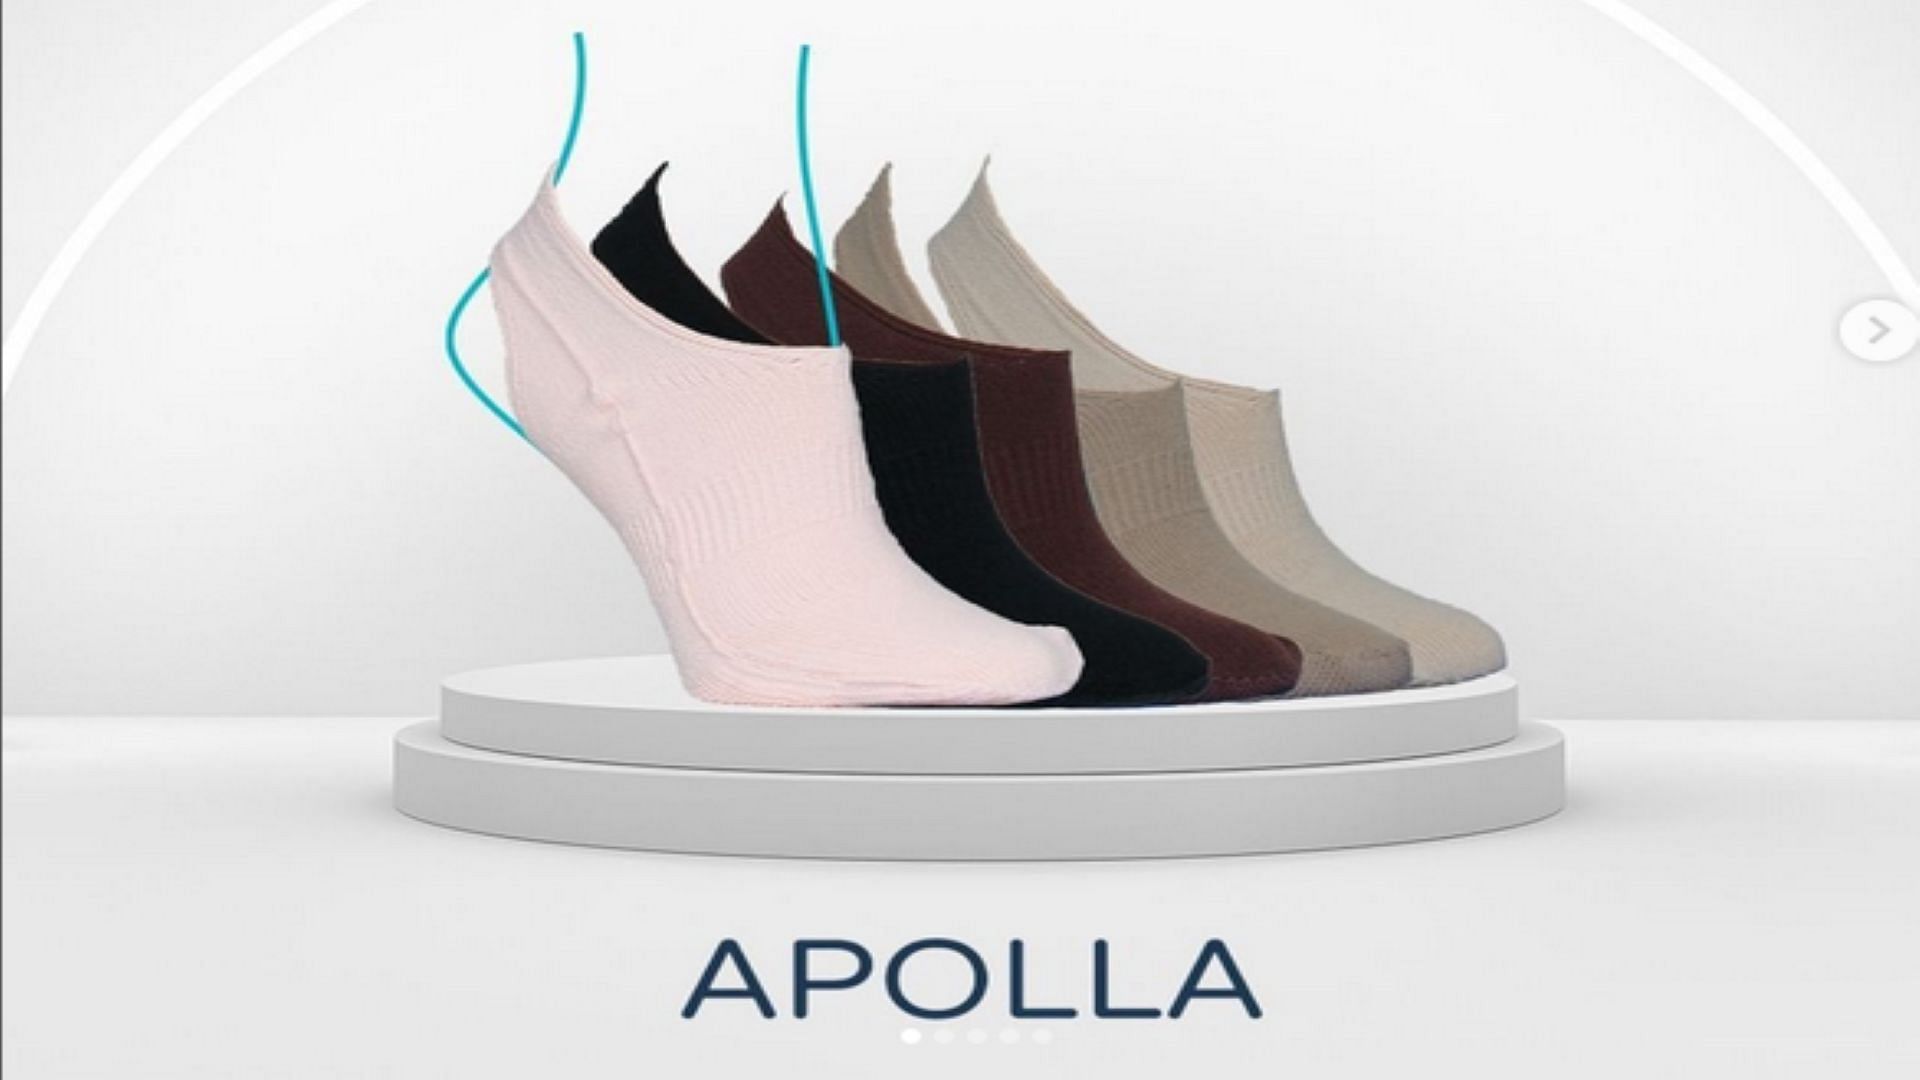 Apolla founders to pitch on Shark Tank on April 1 (image via @apollaperformance/Instagram)